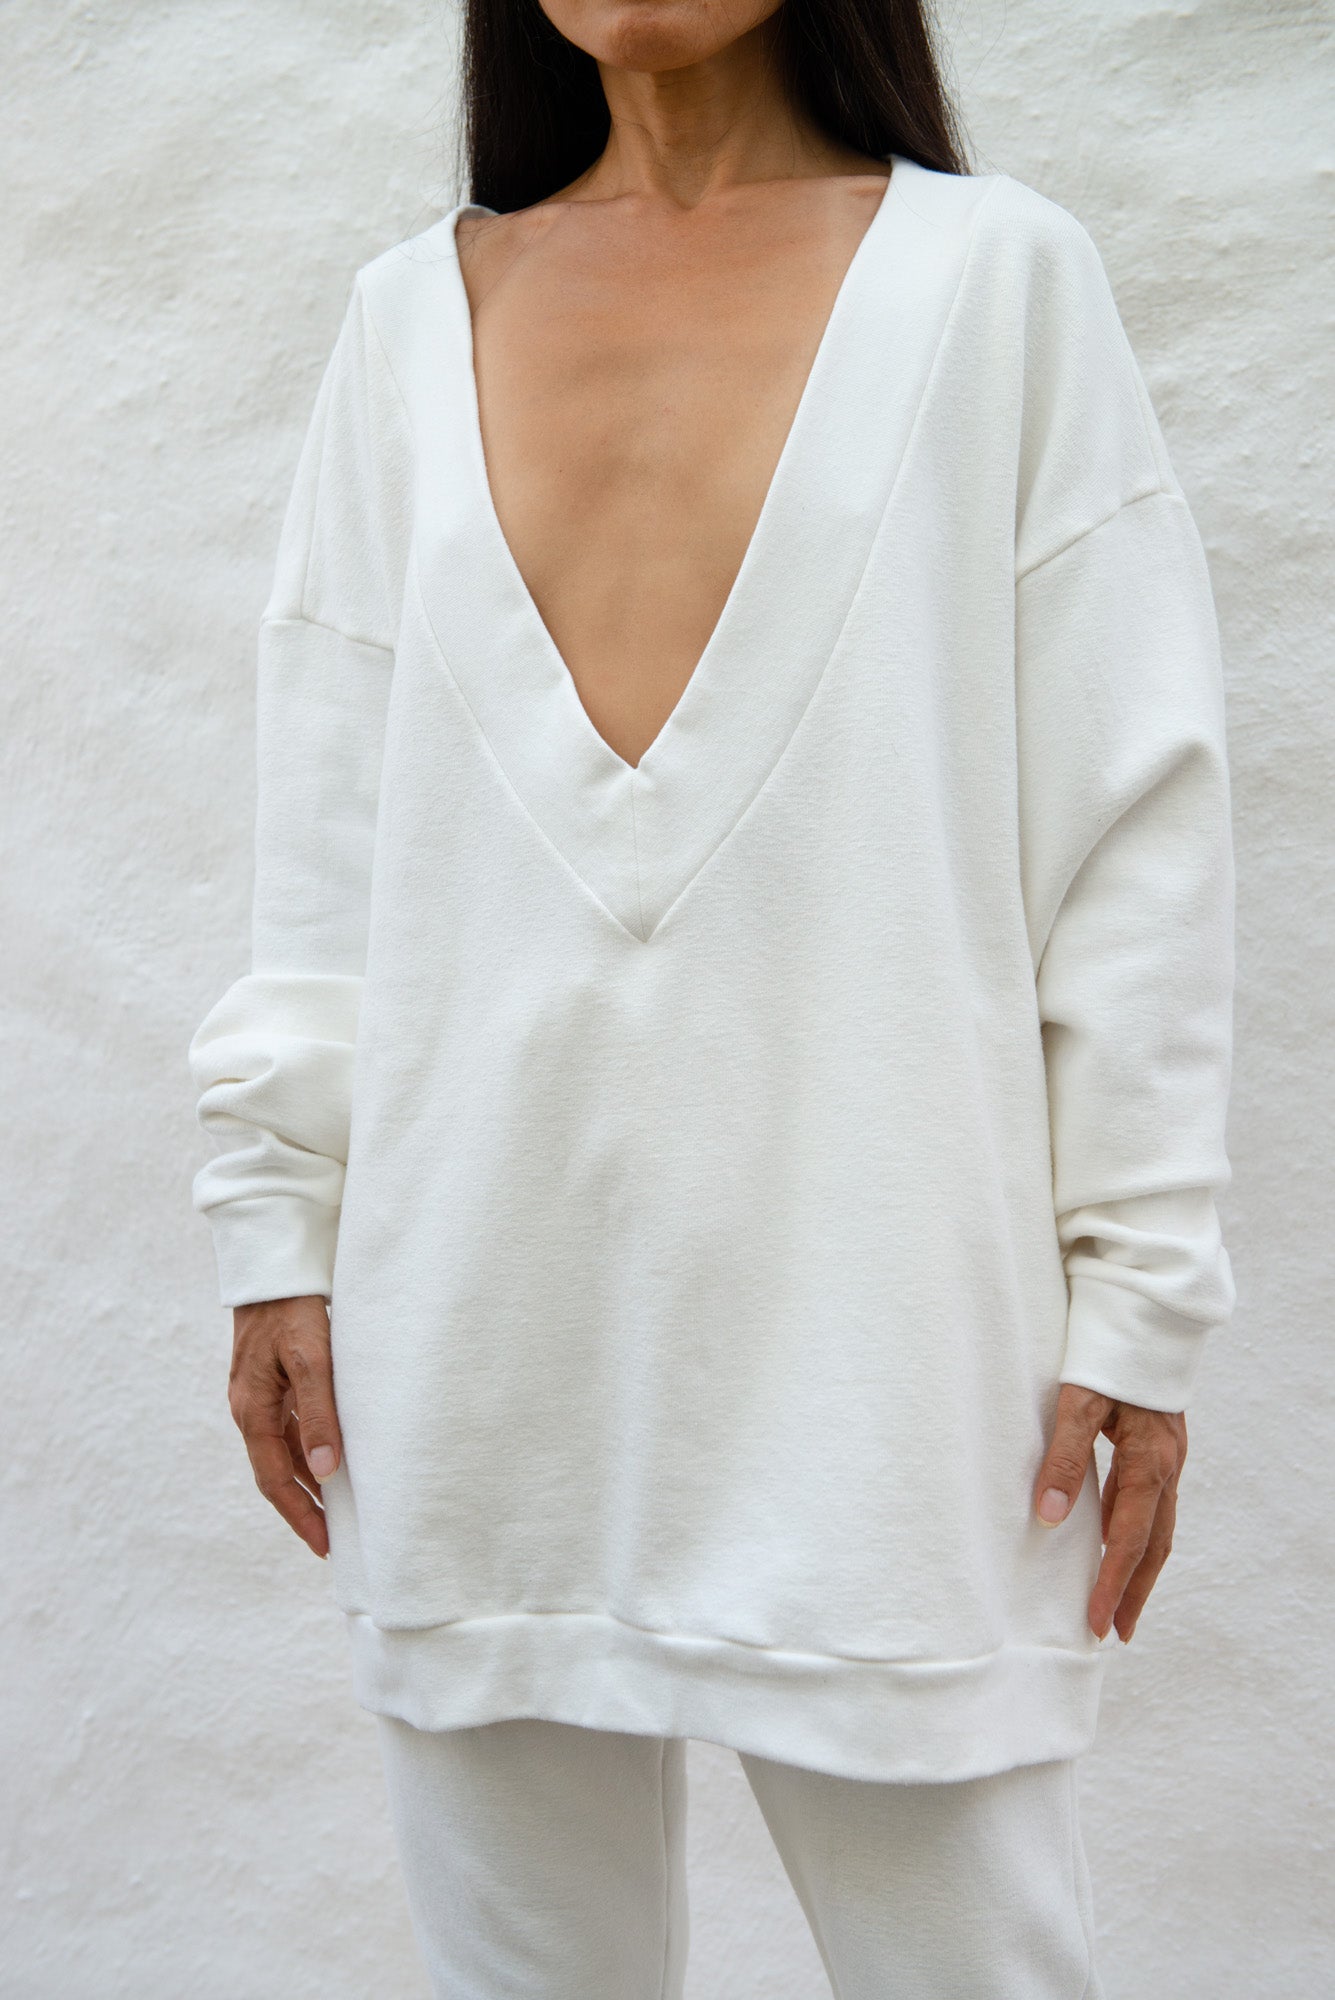 Classic V neck sweater in off white by Can Pep Rey